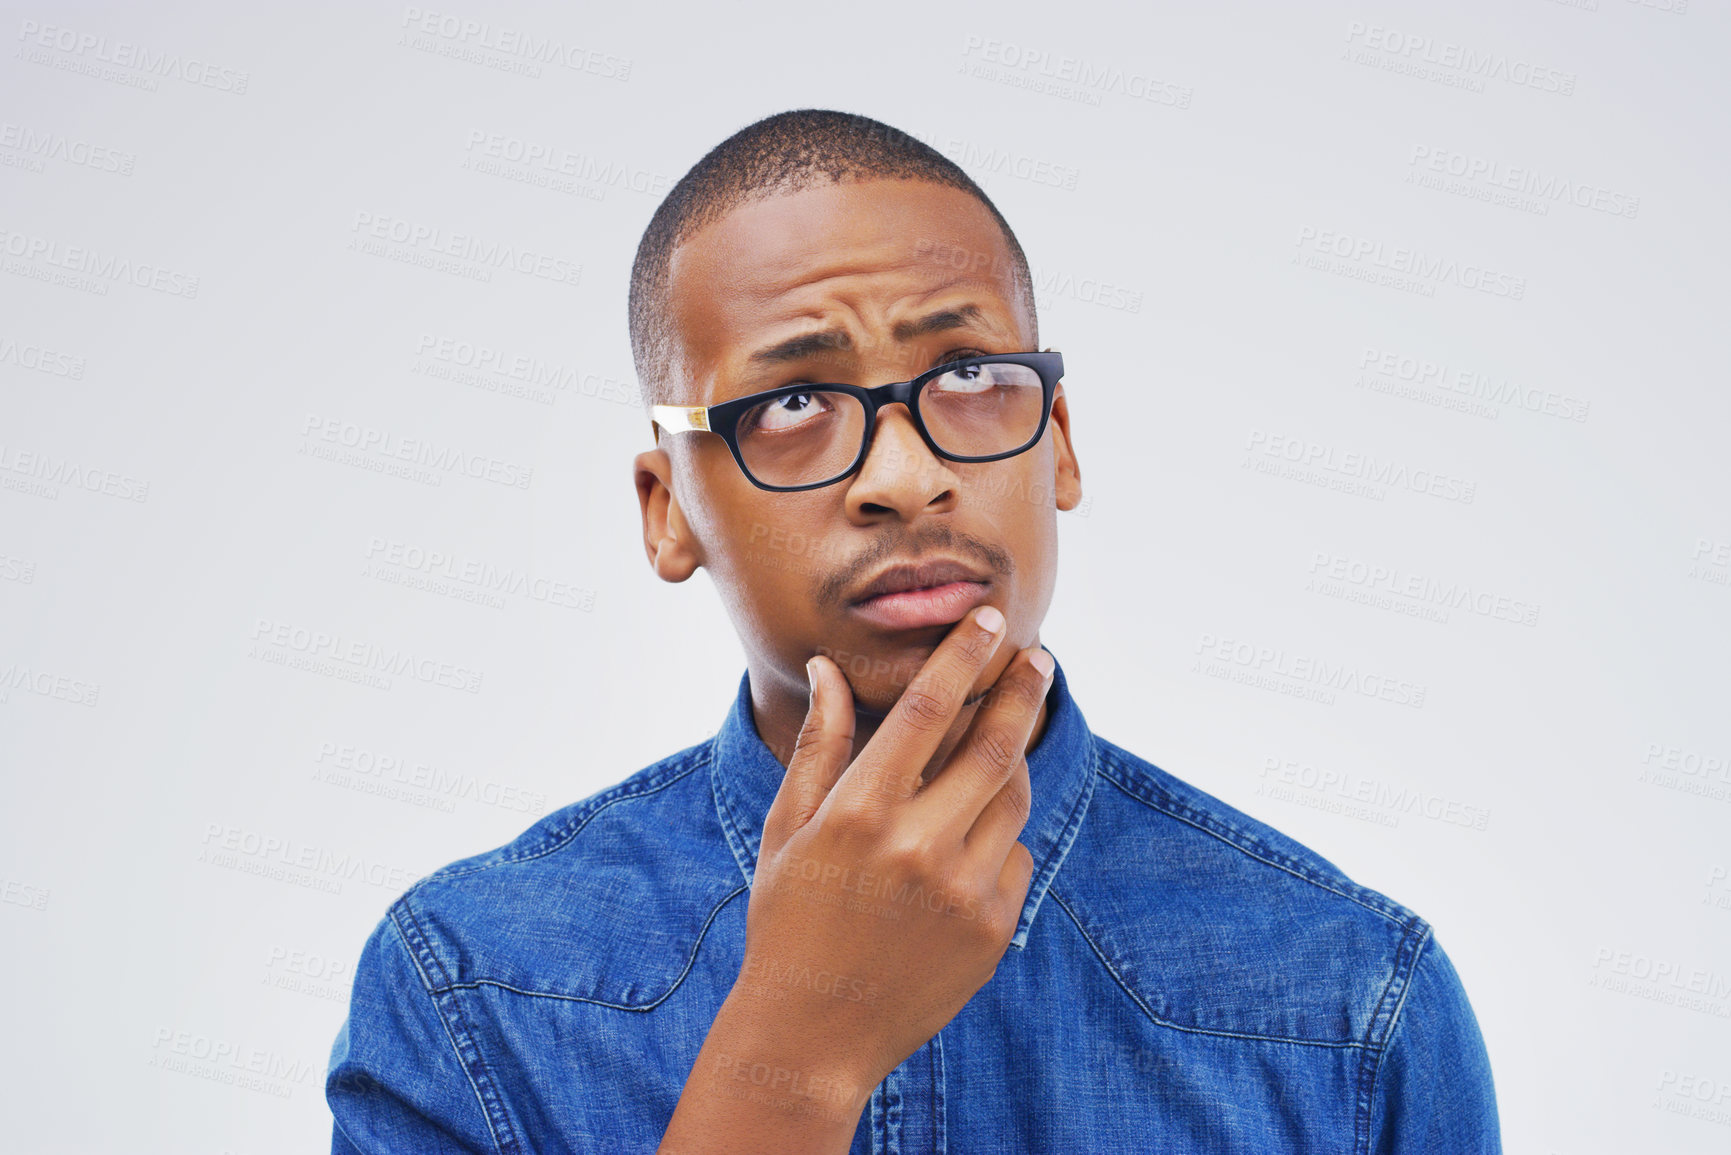 Buy stock photo Studio shot of a young man looking thoughtful against a gray background